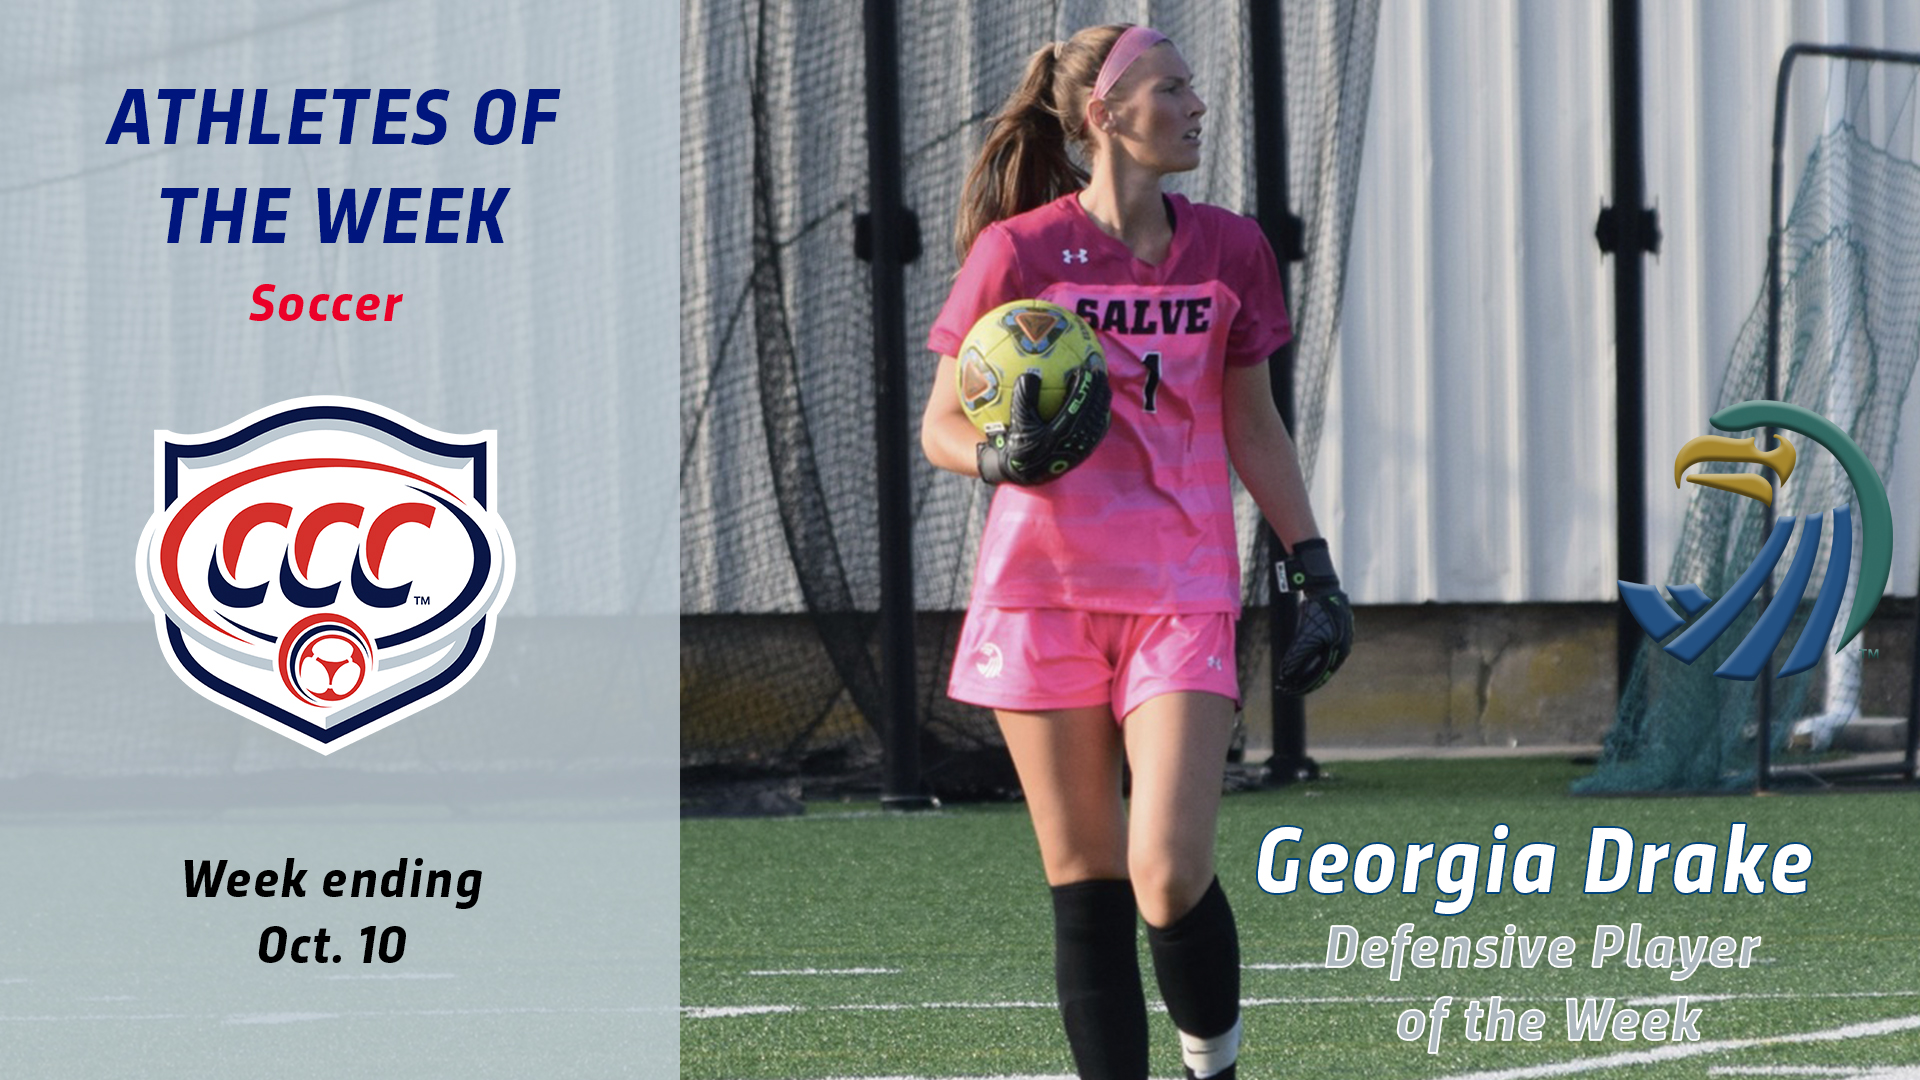 Georgia Drake was named CCC defensive player of the week.